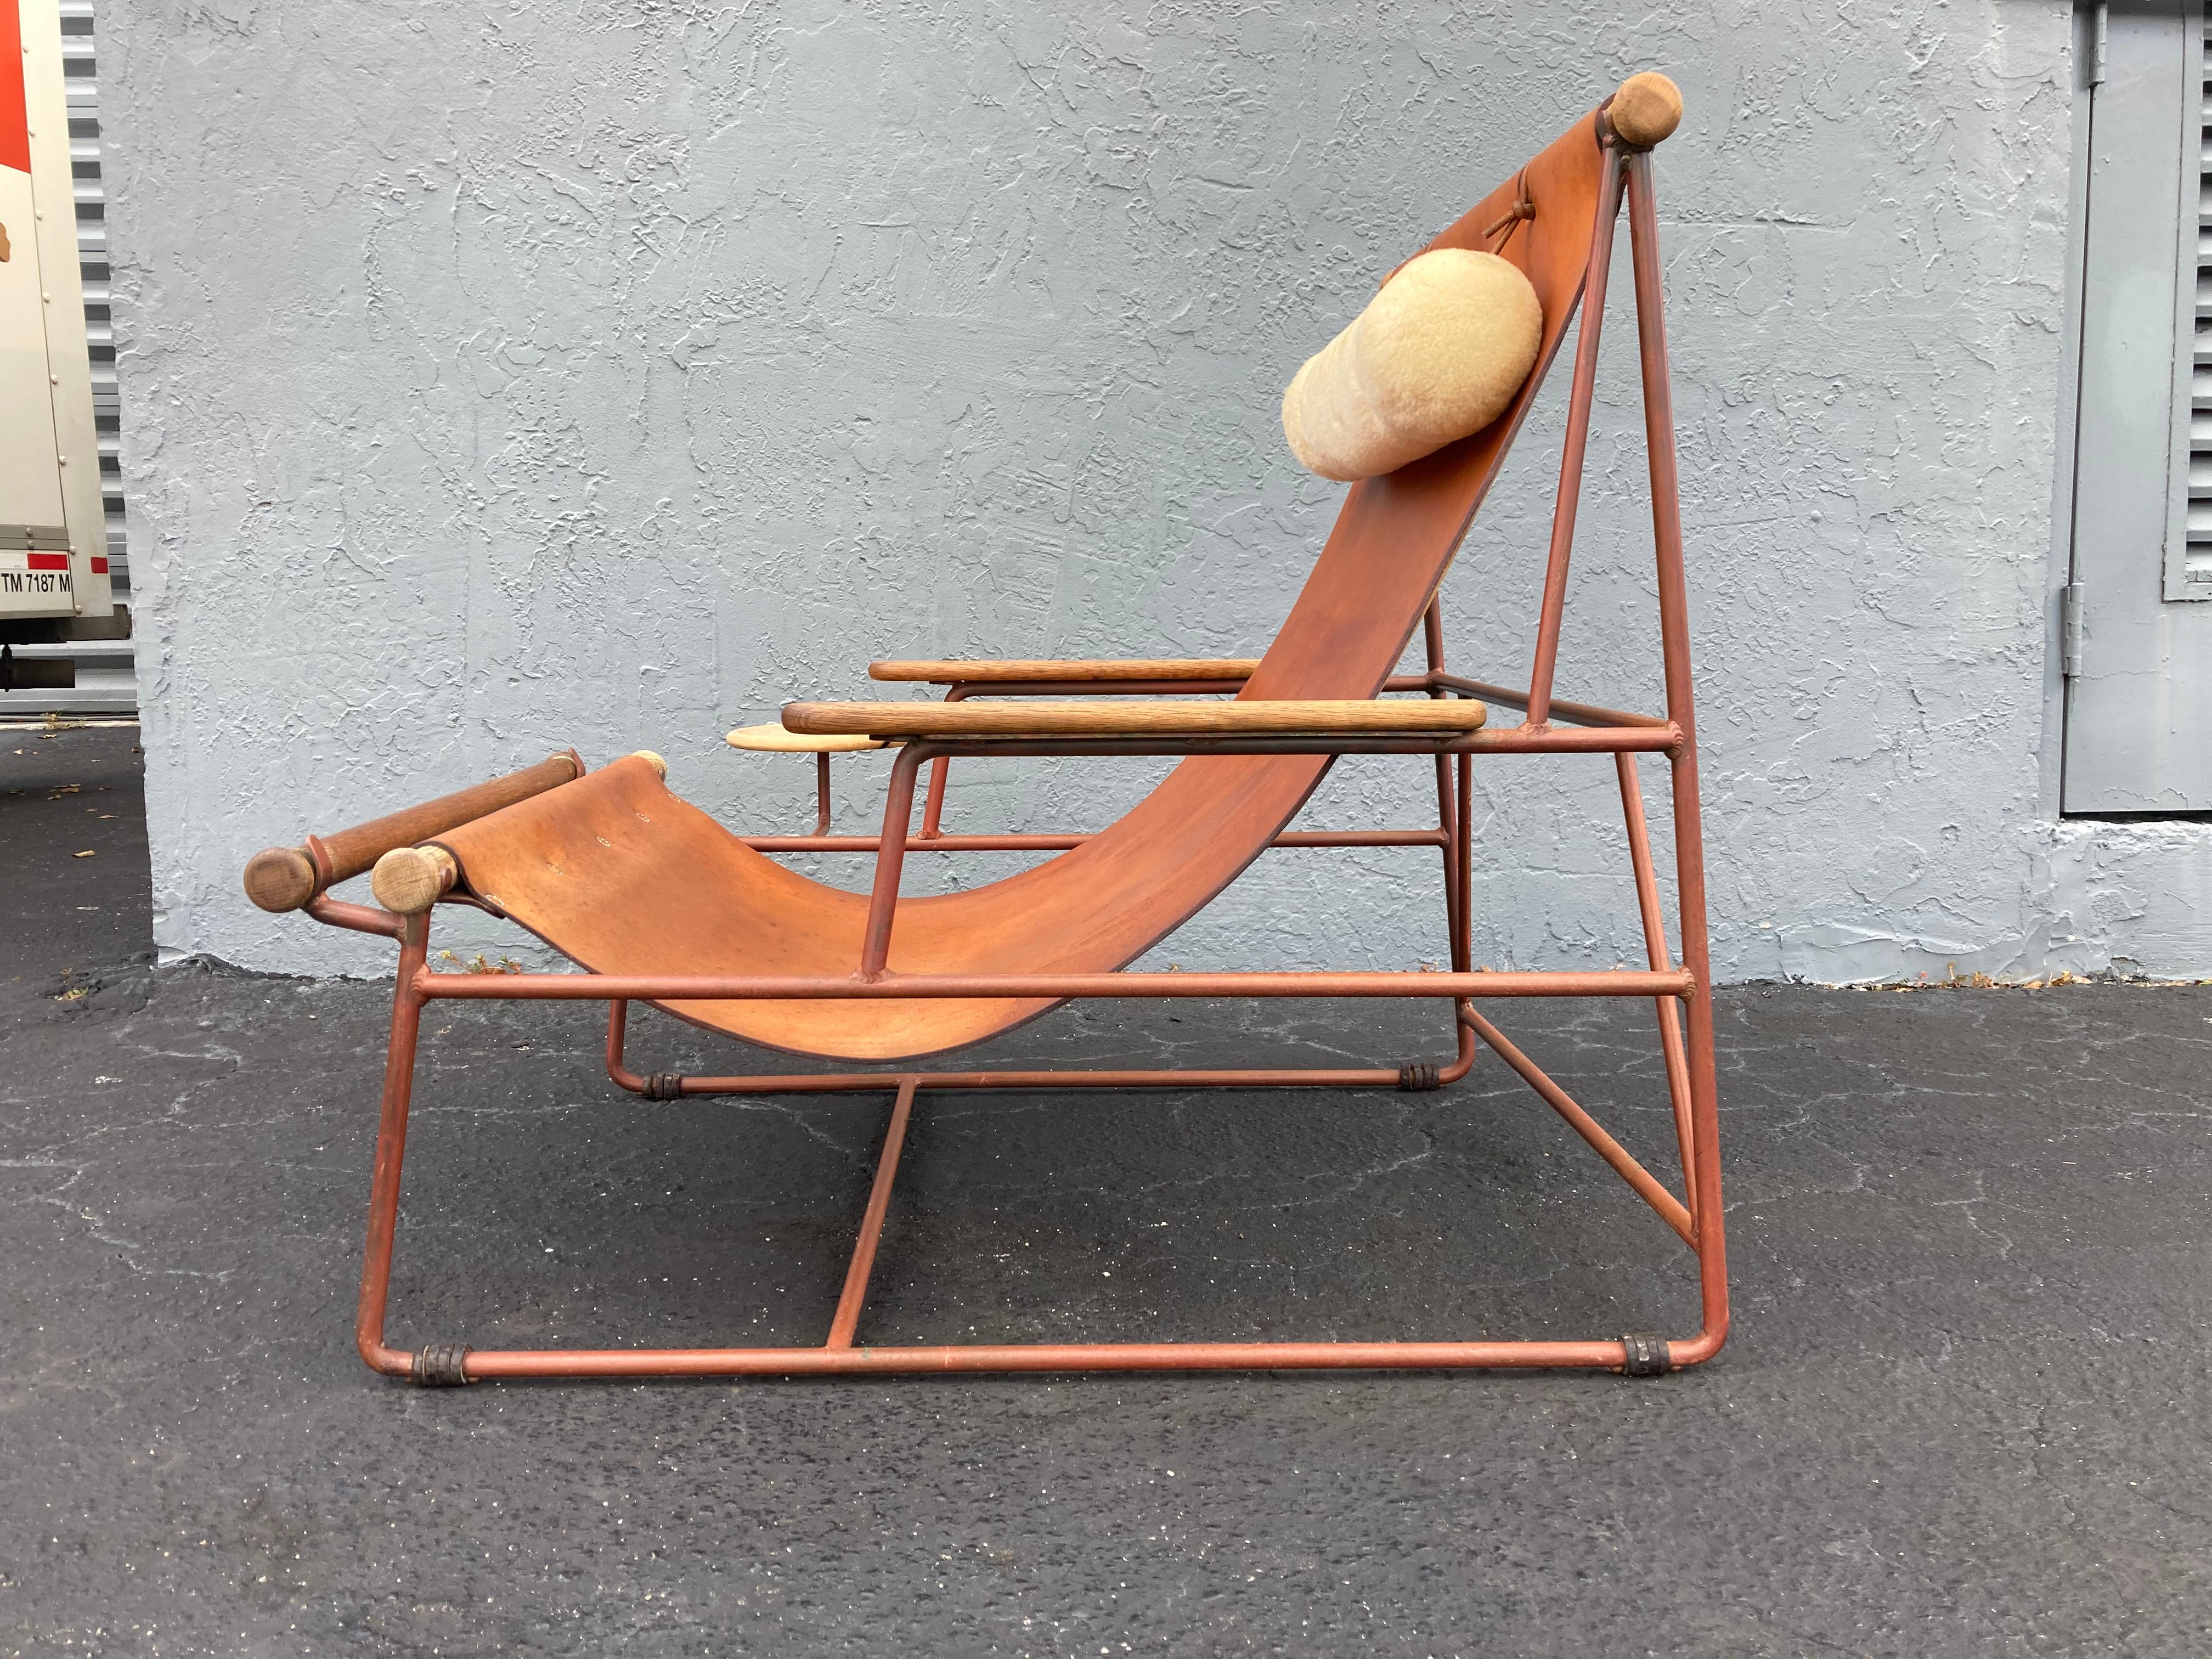 Bronze Beautiful Deck Lounge Chair Designed by Tyler Hays and Made by BDDW, Leather